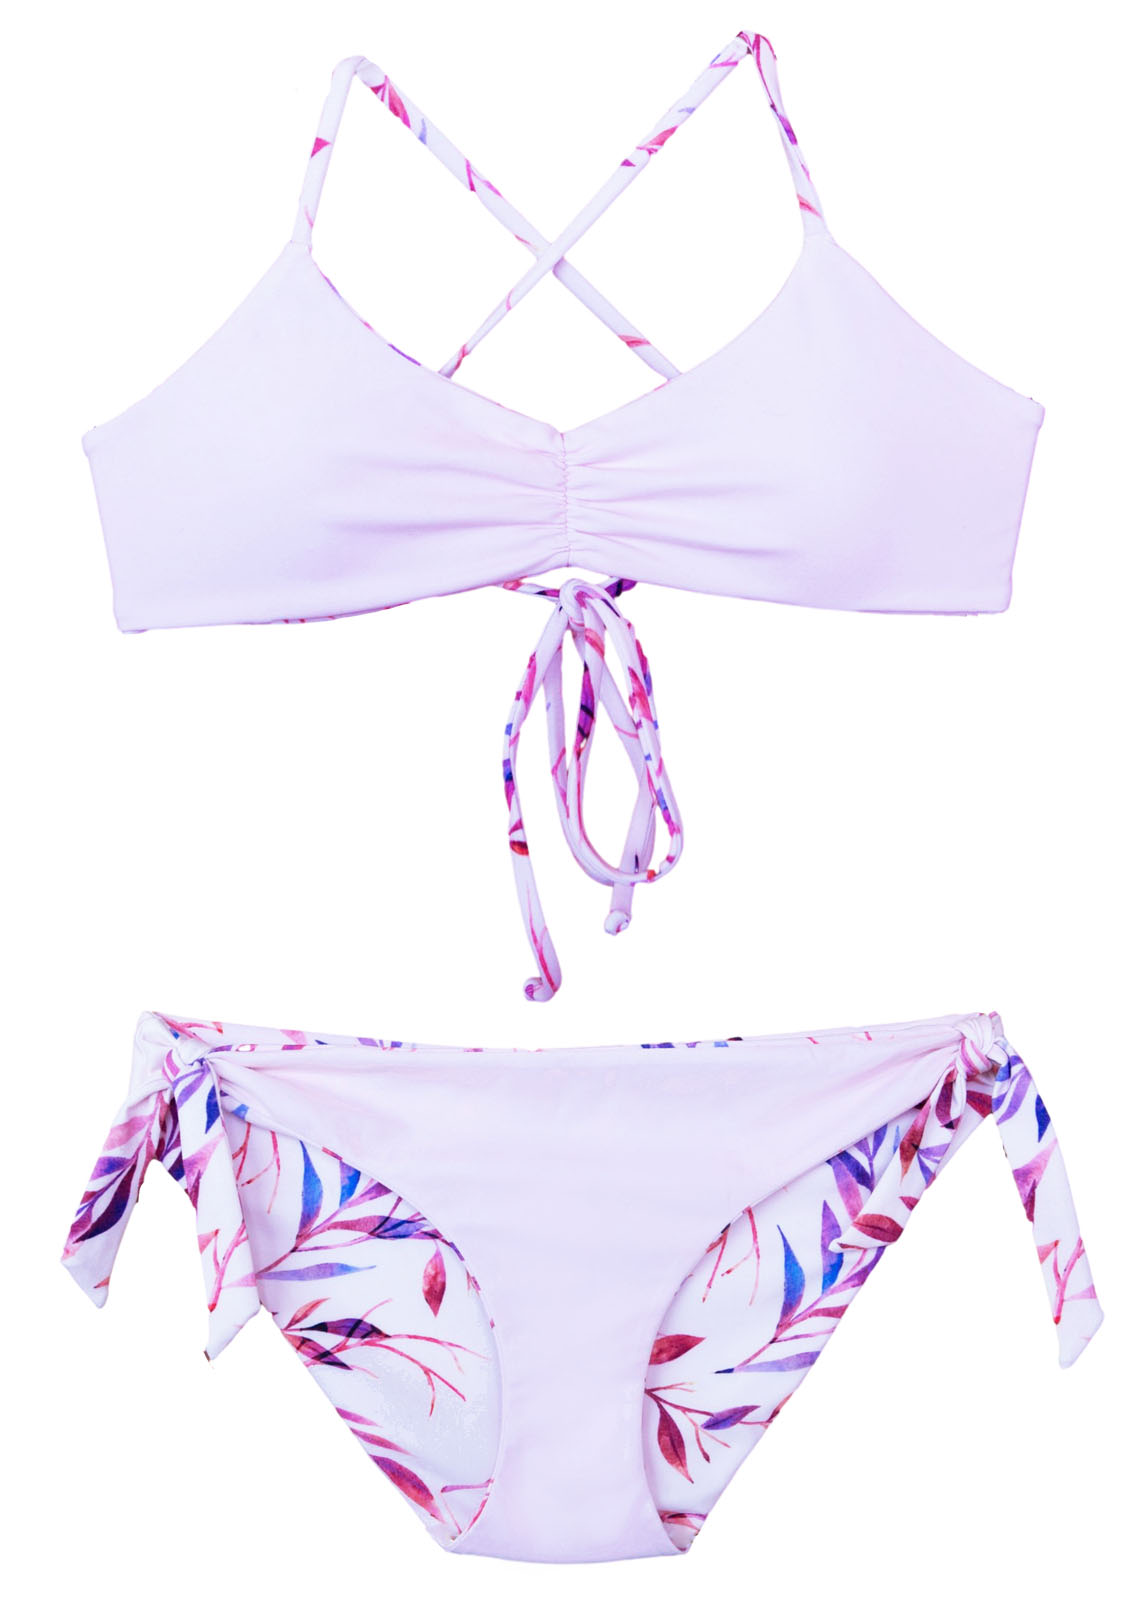 Reversible side of the Elea Pink Bikini 2-piece by Chance Loves, a junior girls brand